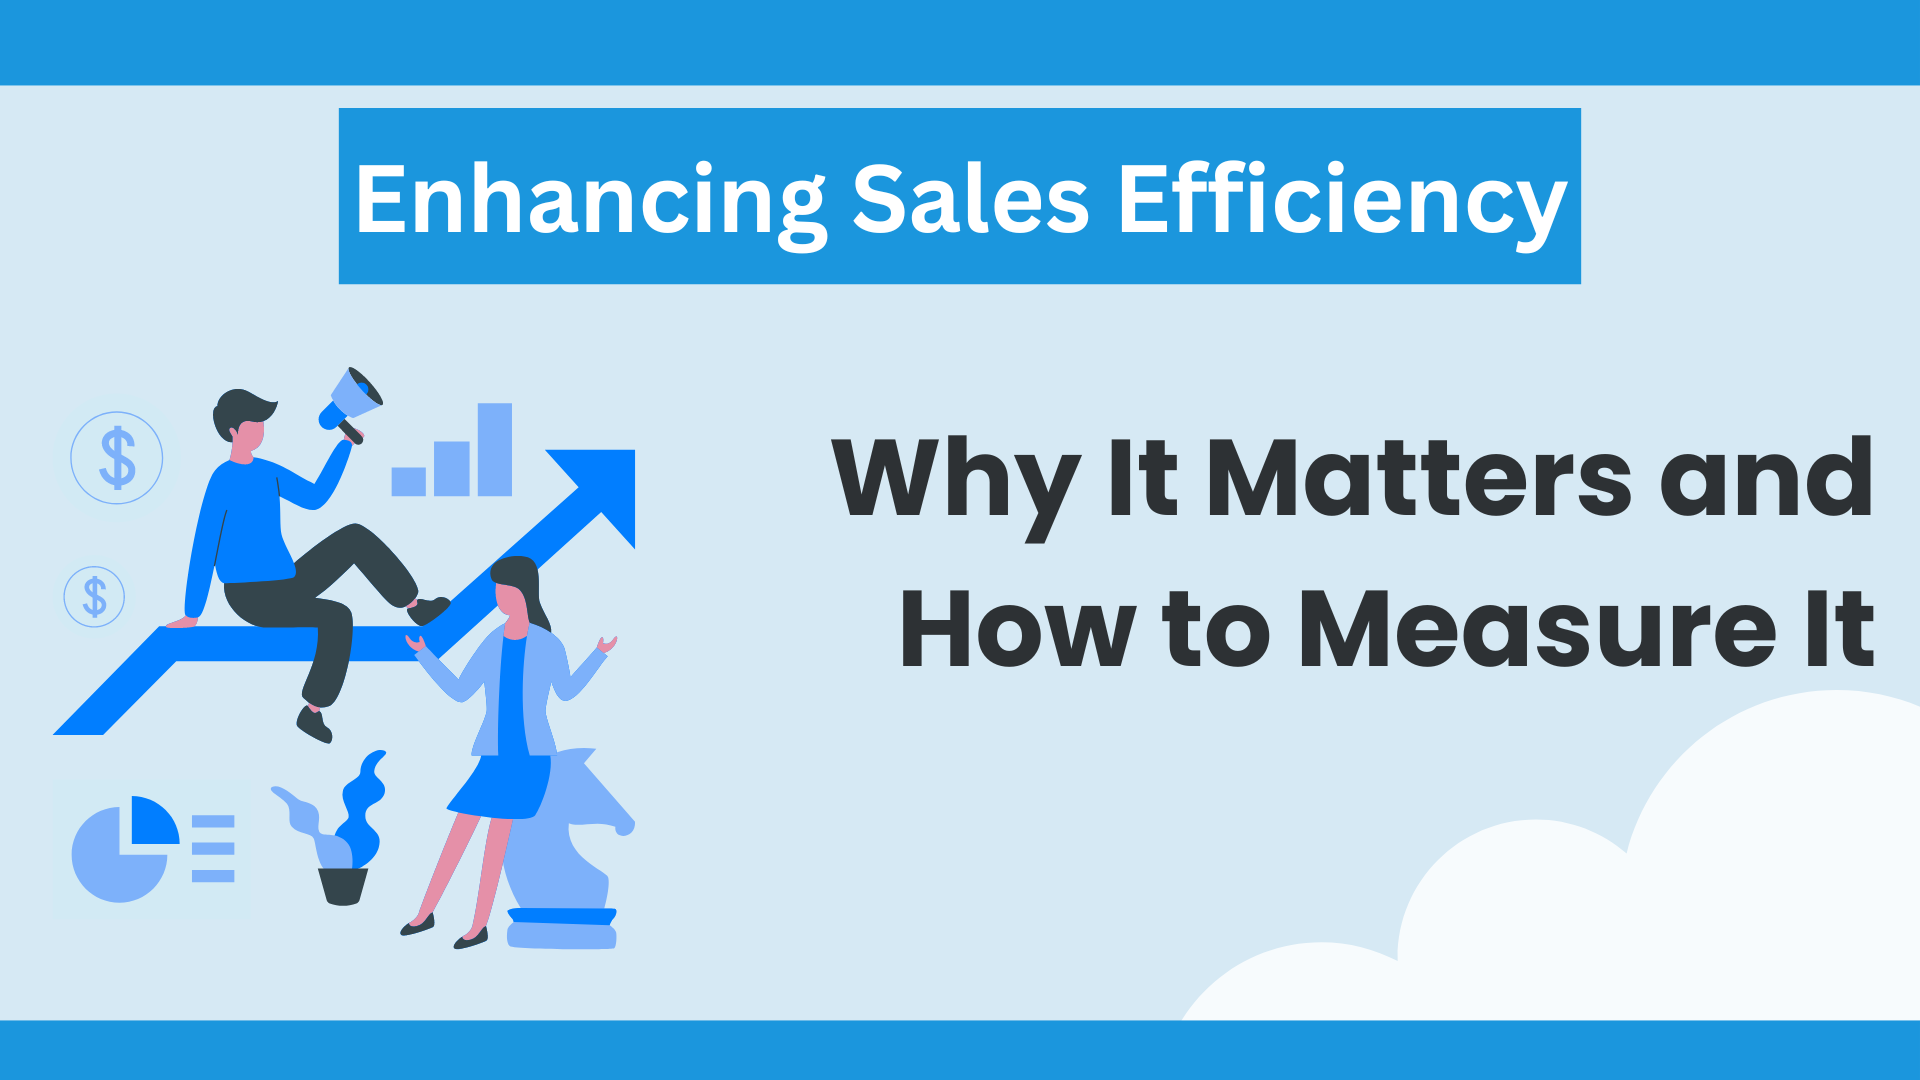 Enhancing Sales Efficiency: Why It Matters and How to Measure It